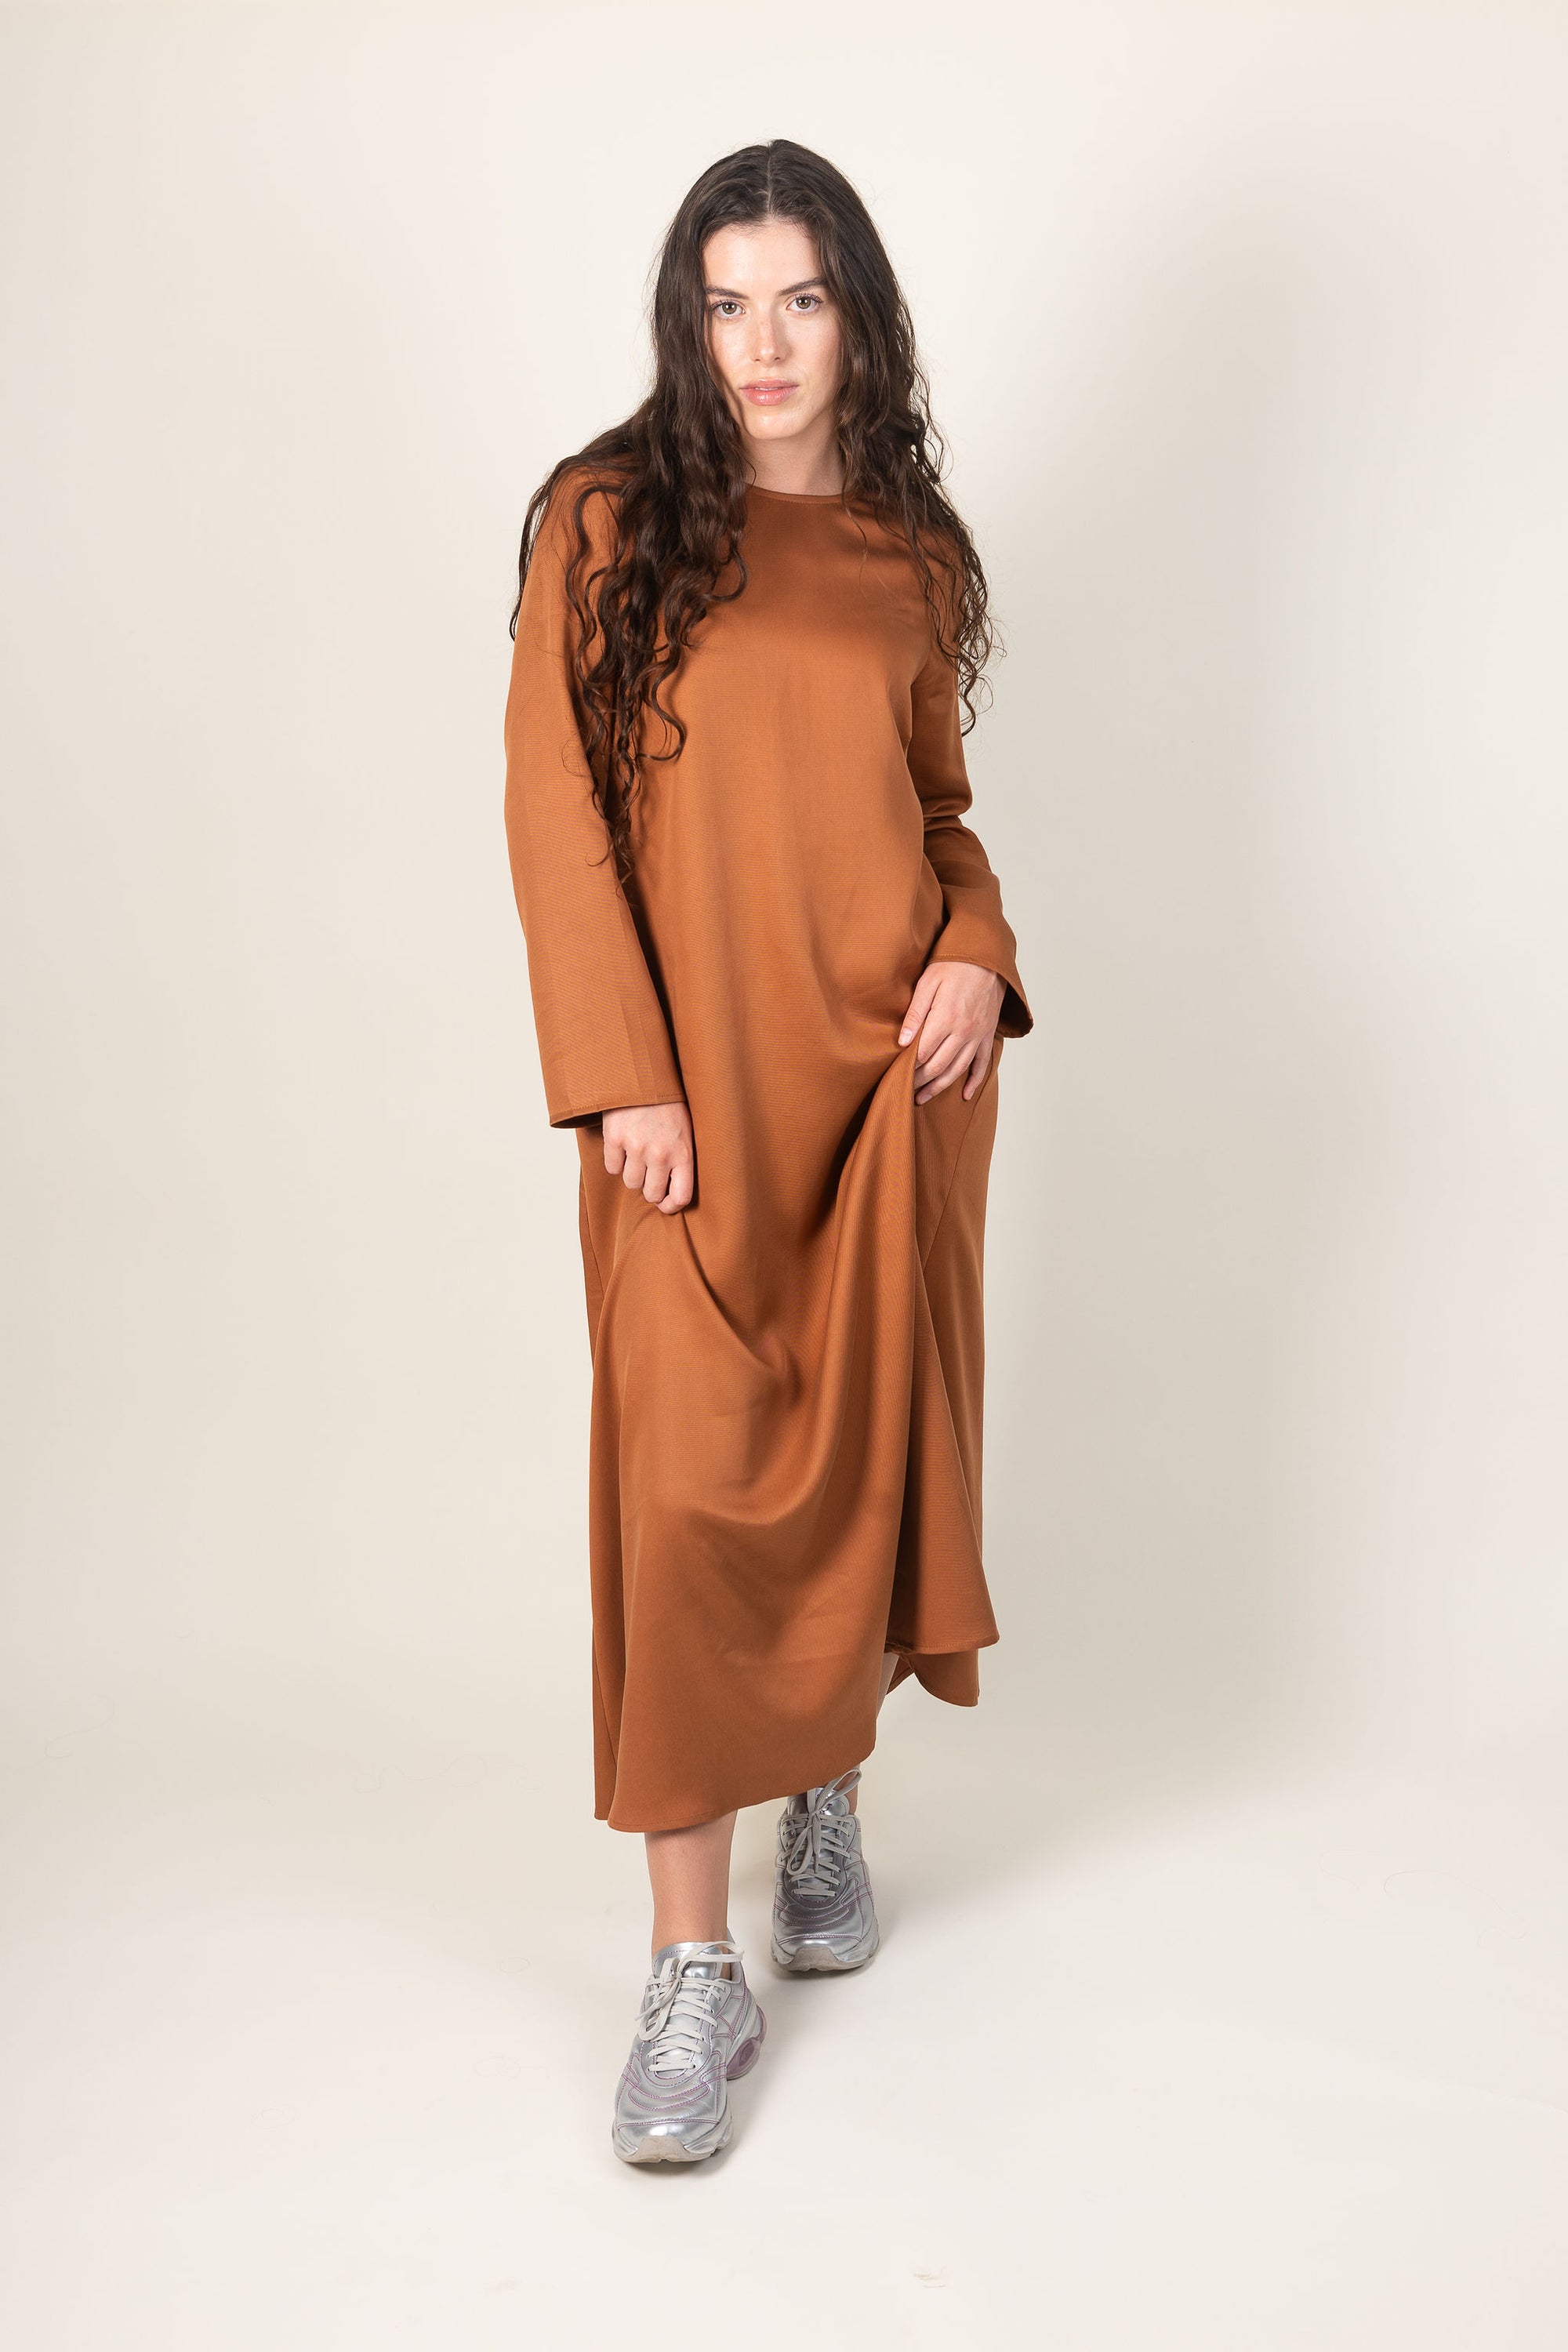 Ames Store Staple Dress in Bronze Winter dress with sneakers